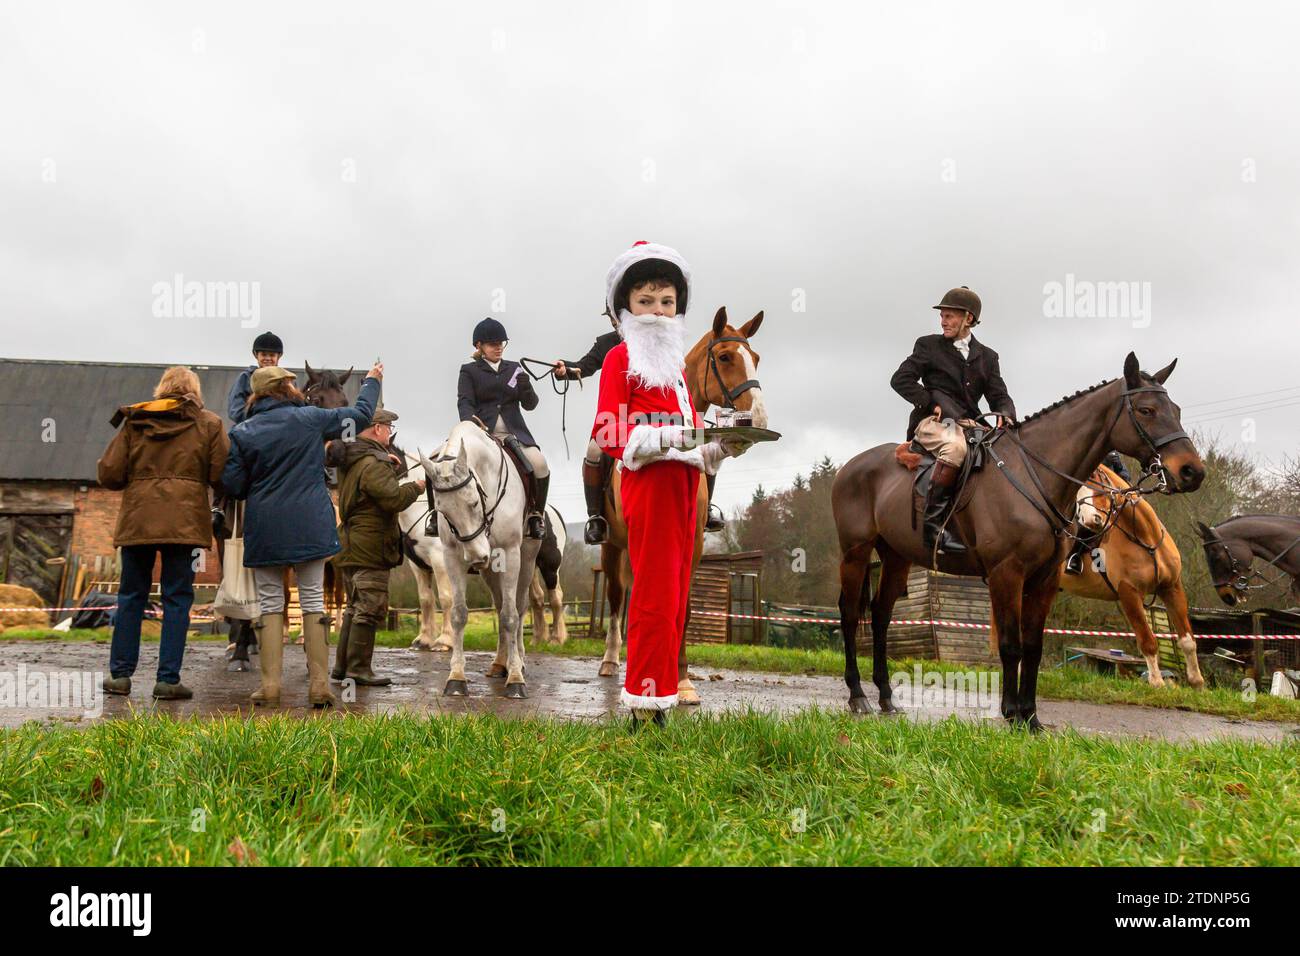 Upper Arley, Kidderminster, Worcestershire, UK. 19th Dec, 2023. 10-year-old Henley Mills dressed as Santa Claus hands out the traditional glass of port to members of the Albrighton and Woodland hunt as they have a lawn meet and trail ride from a farm in Upper Arley, near Kidderminster in Worcestershire. Credit: Peter Lopeman/Alamy Live News Stock Photo